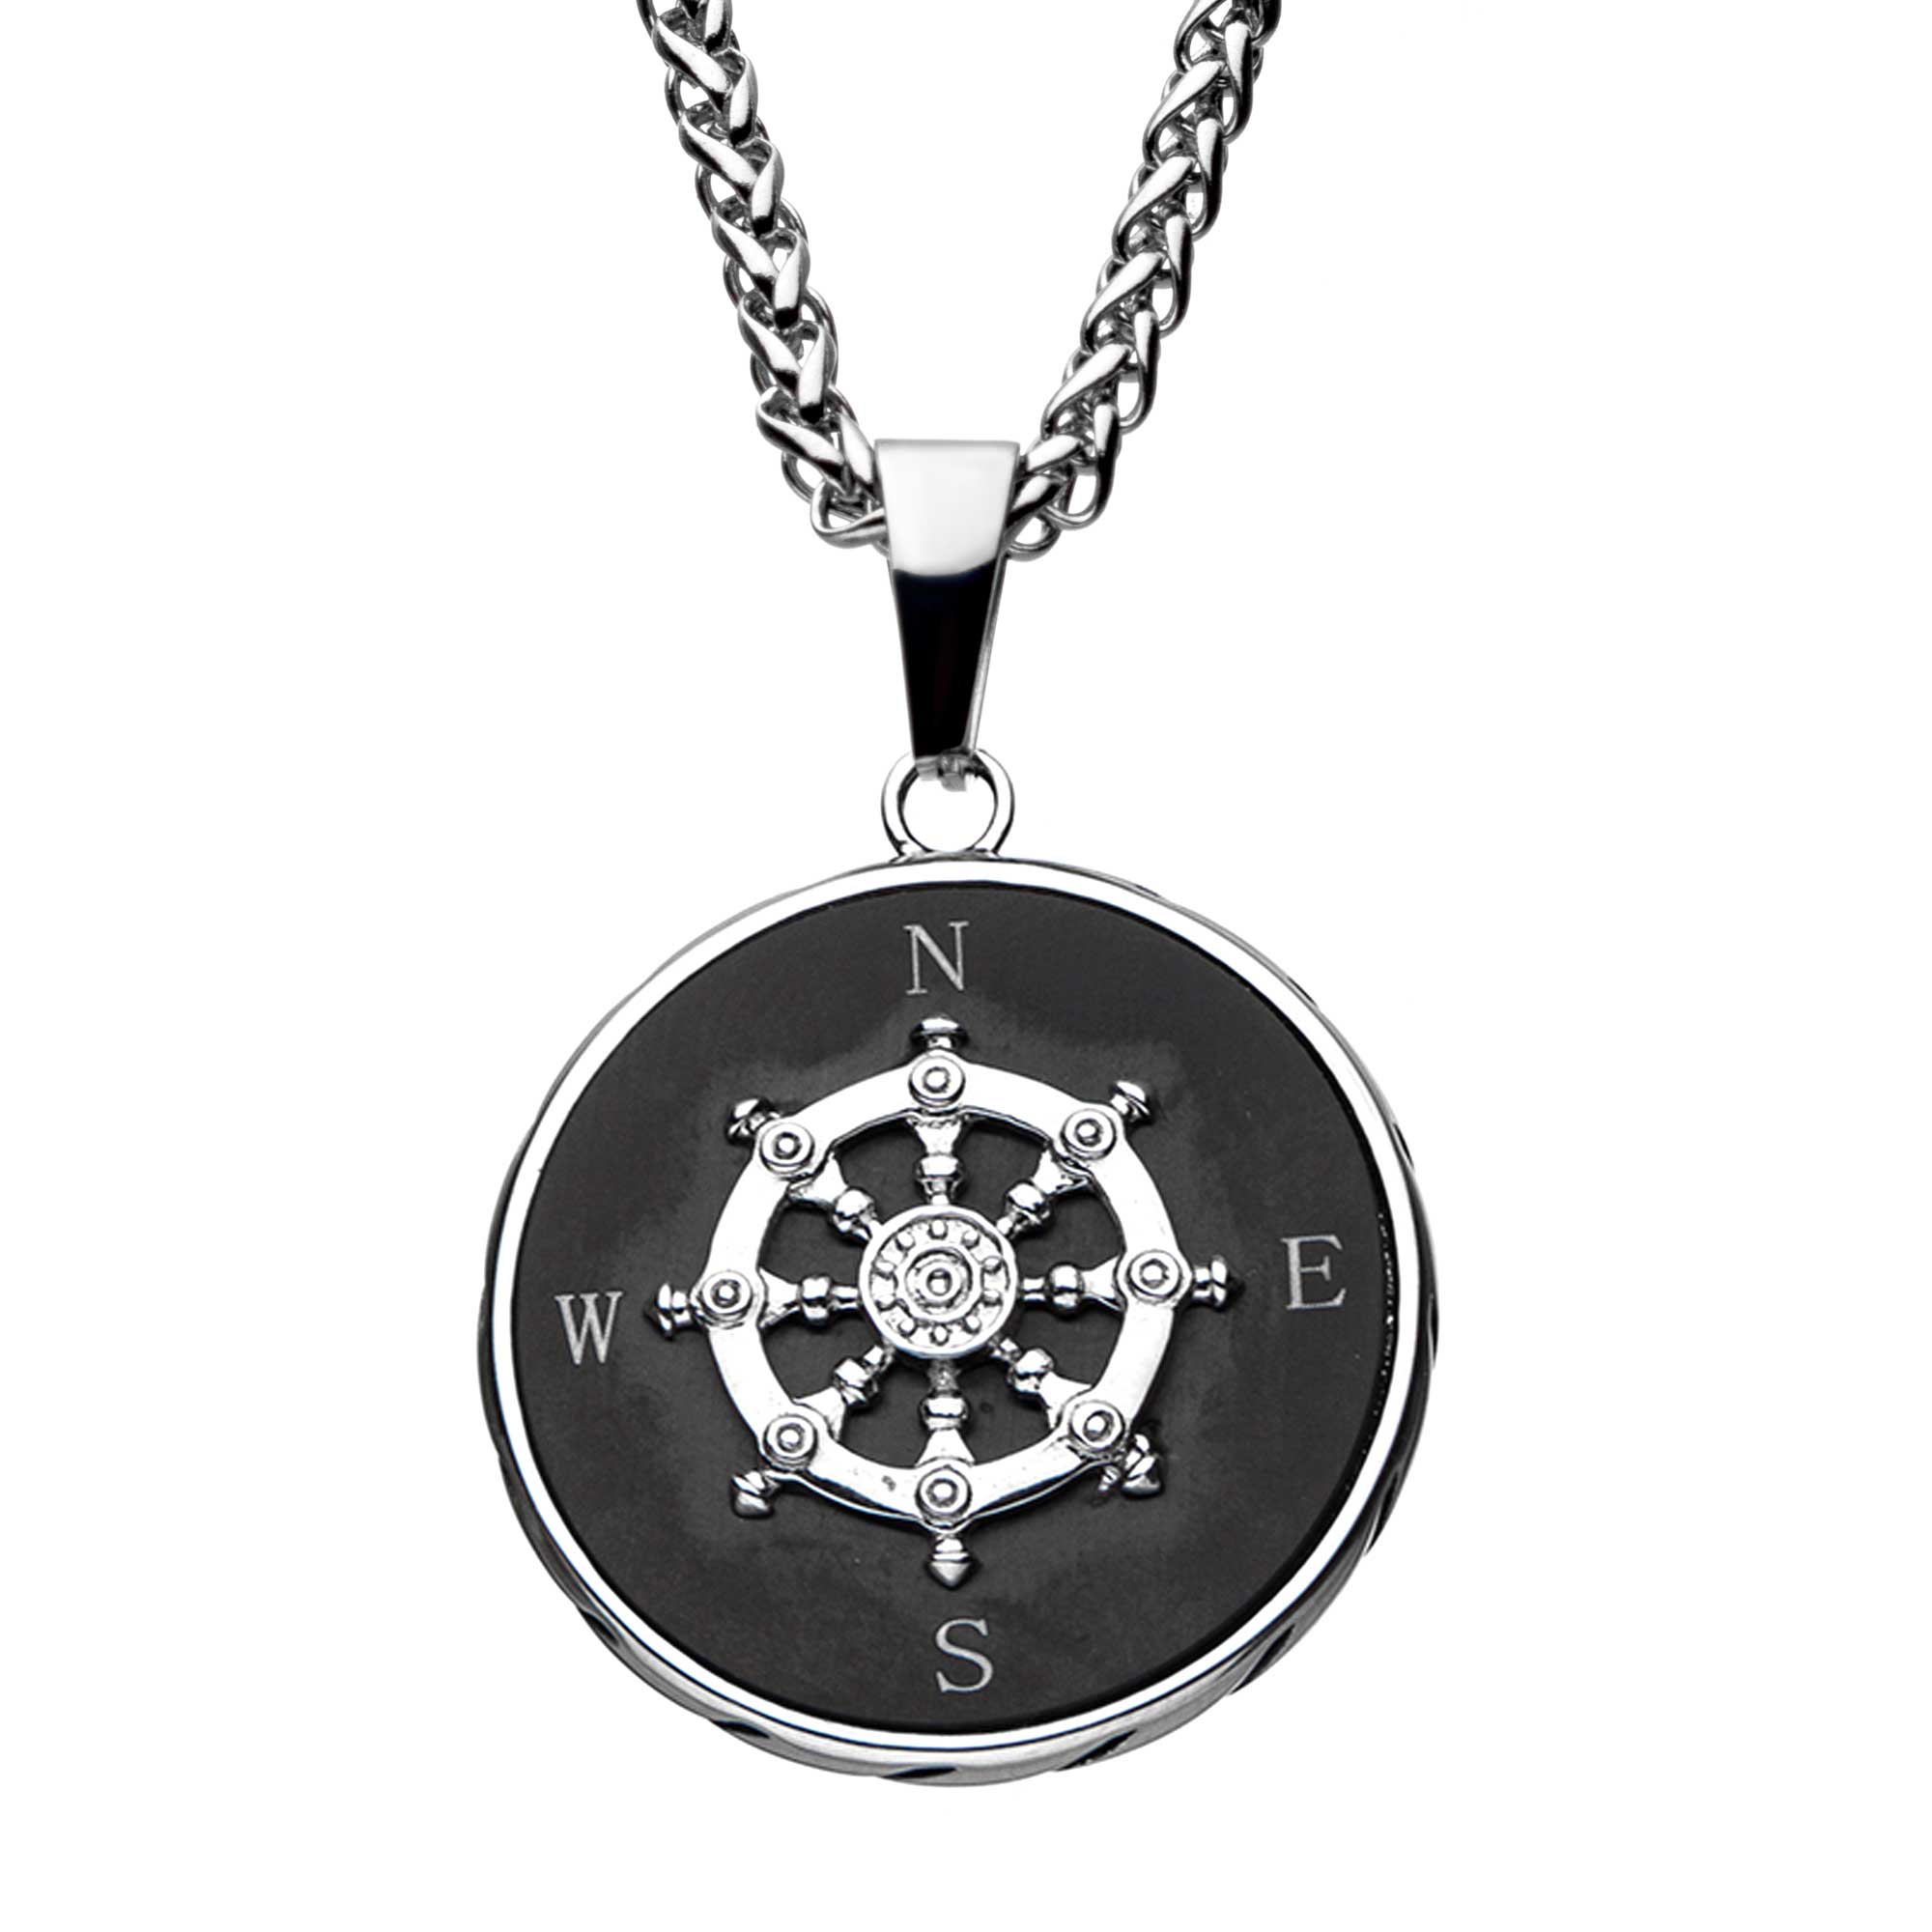 Stainless Steel Black Plated Ship's Wheel Compass Pendant with Chain Lewis Jewelers, Inc. Ansonia, CT